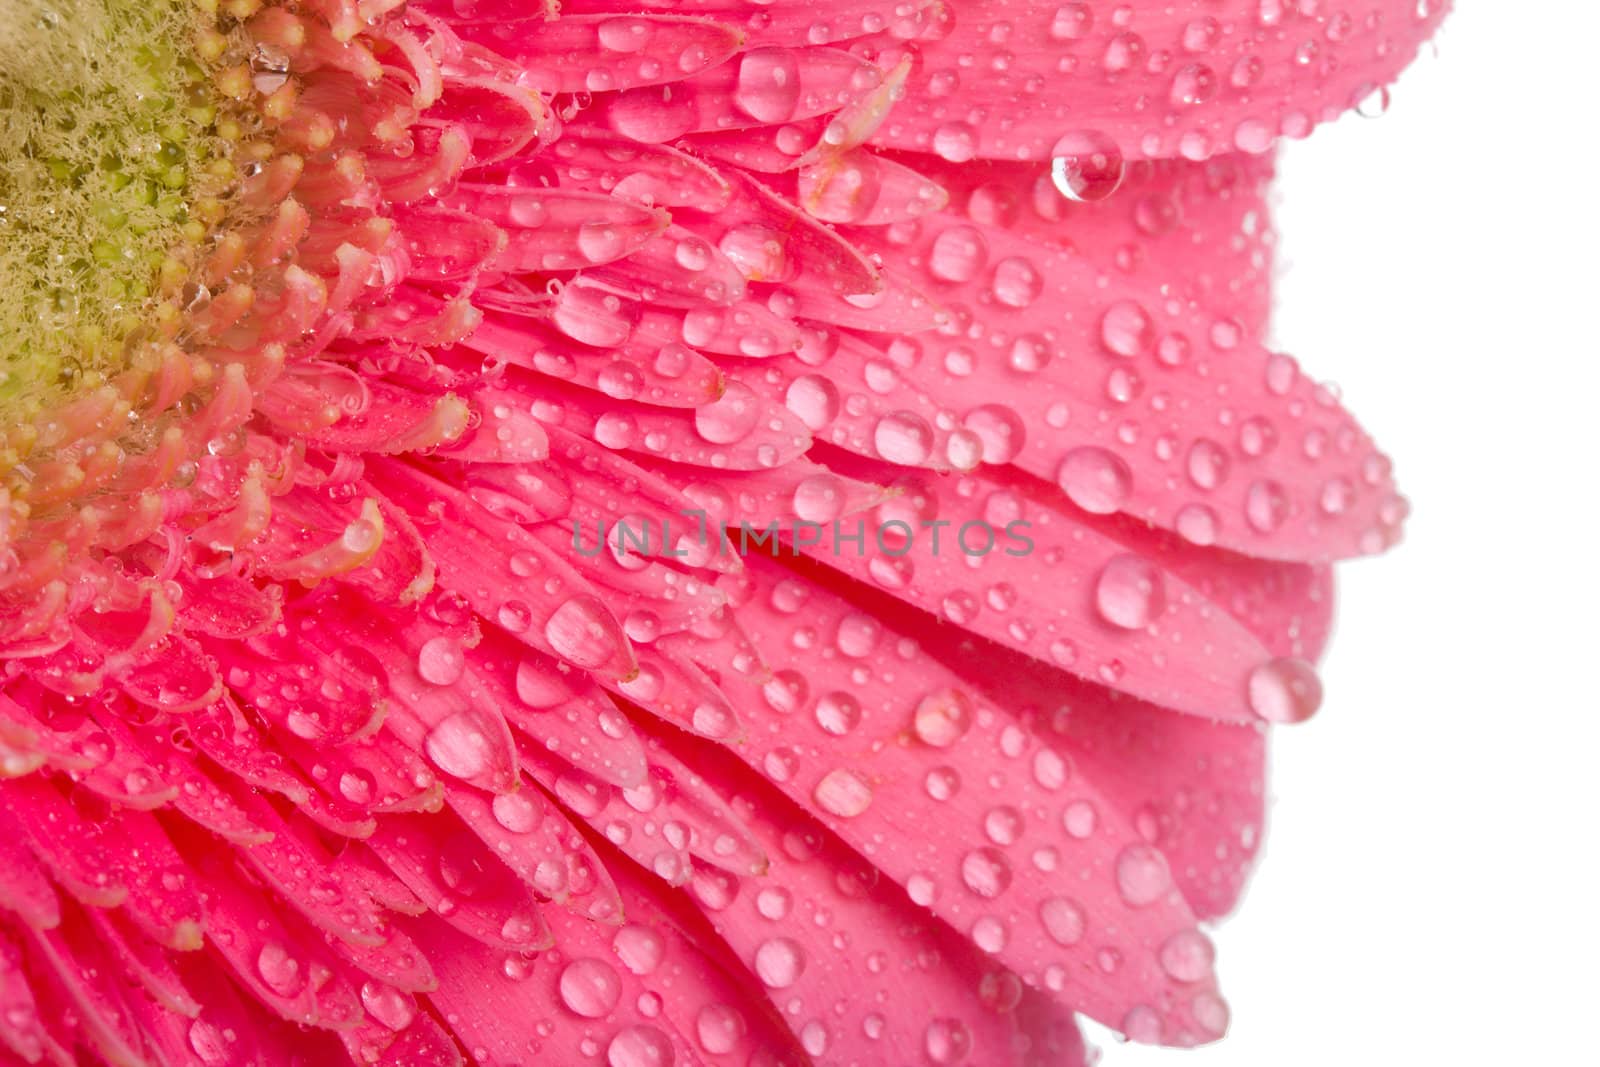 close-up pink gerbera with drops of water, isolated on white